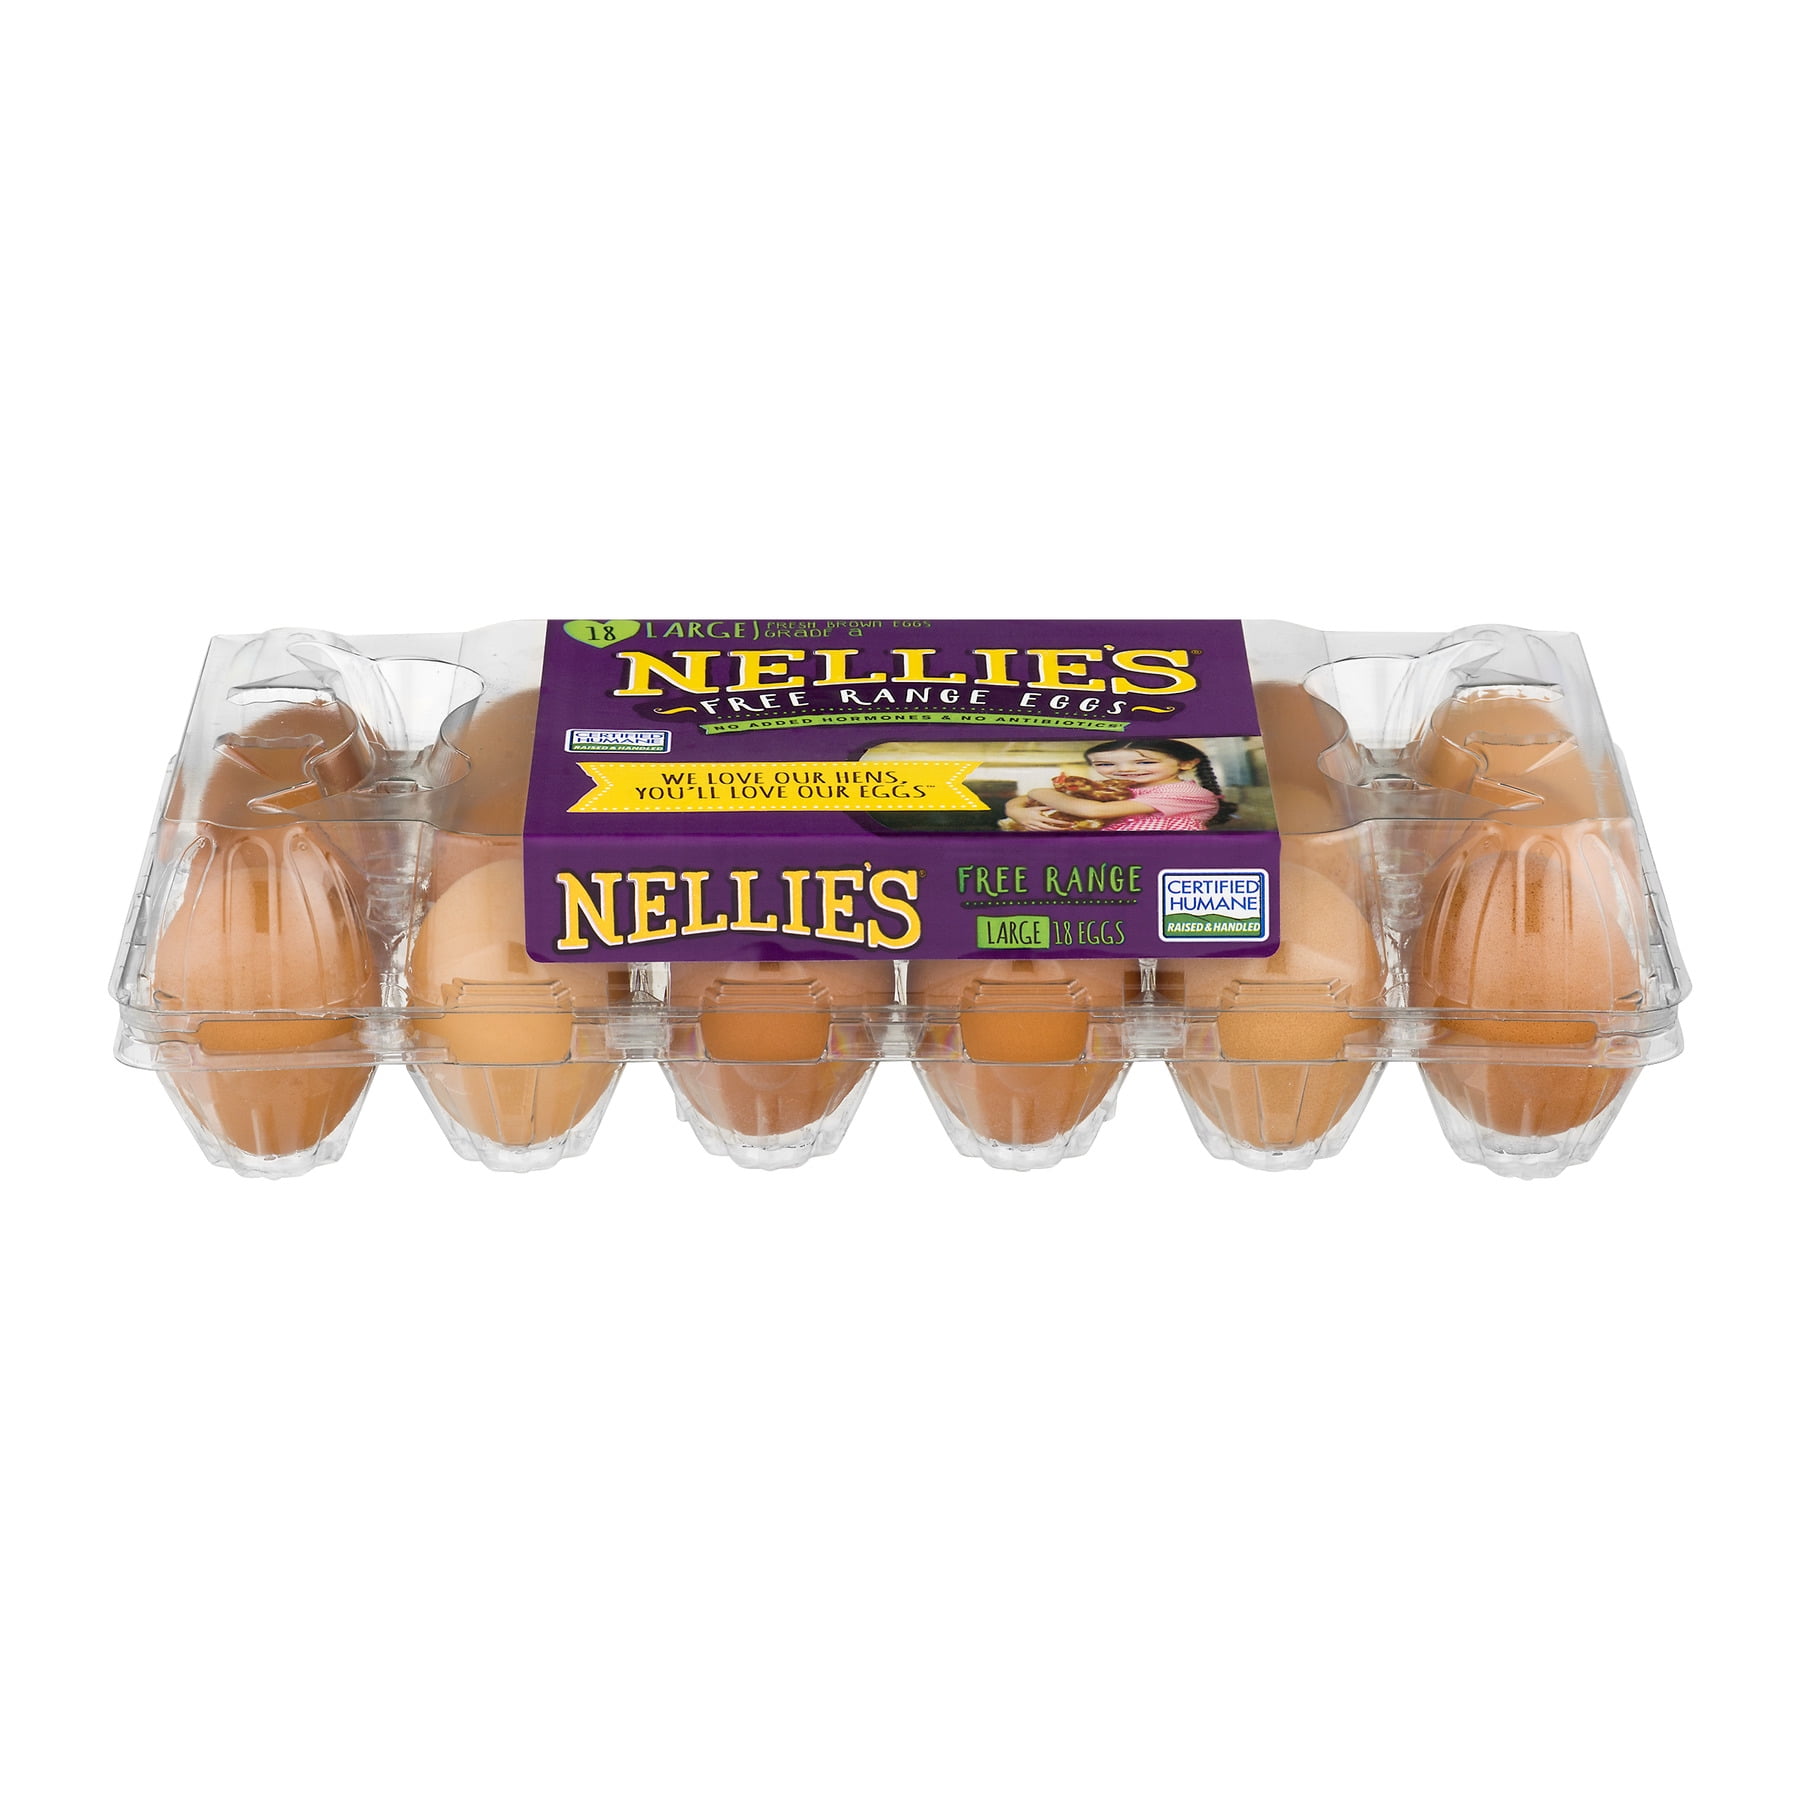 Save on Nellie's Grade A Brown Eggs Large Free Range All Natural Order  Online Delivery